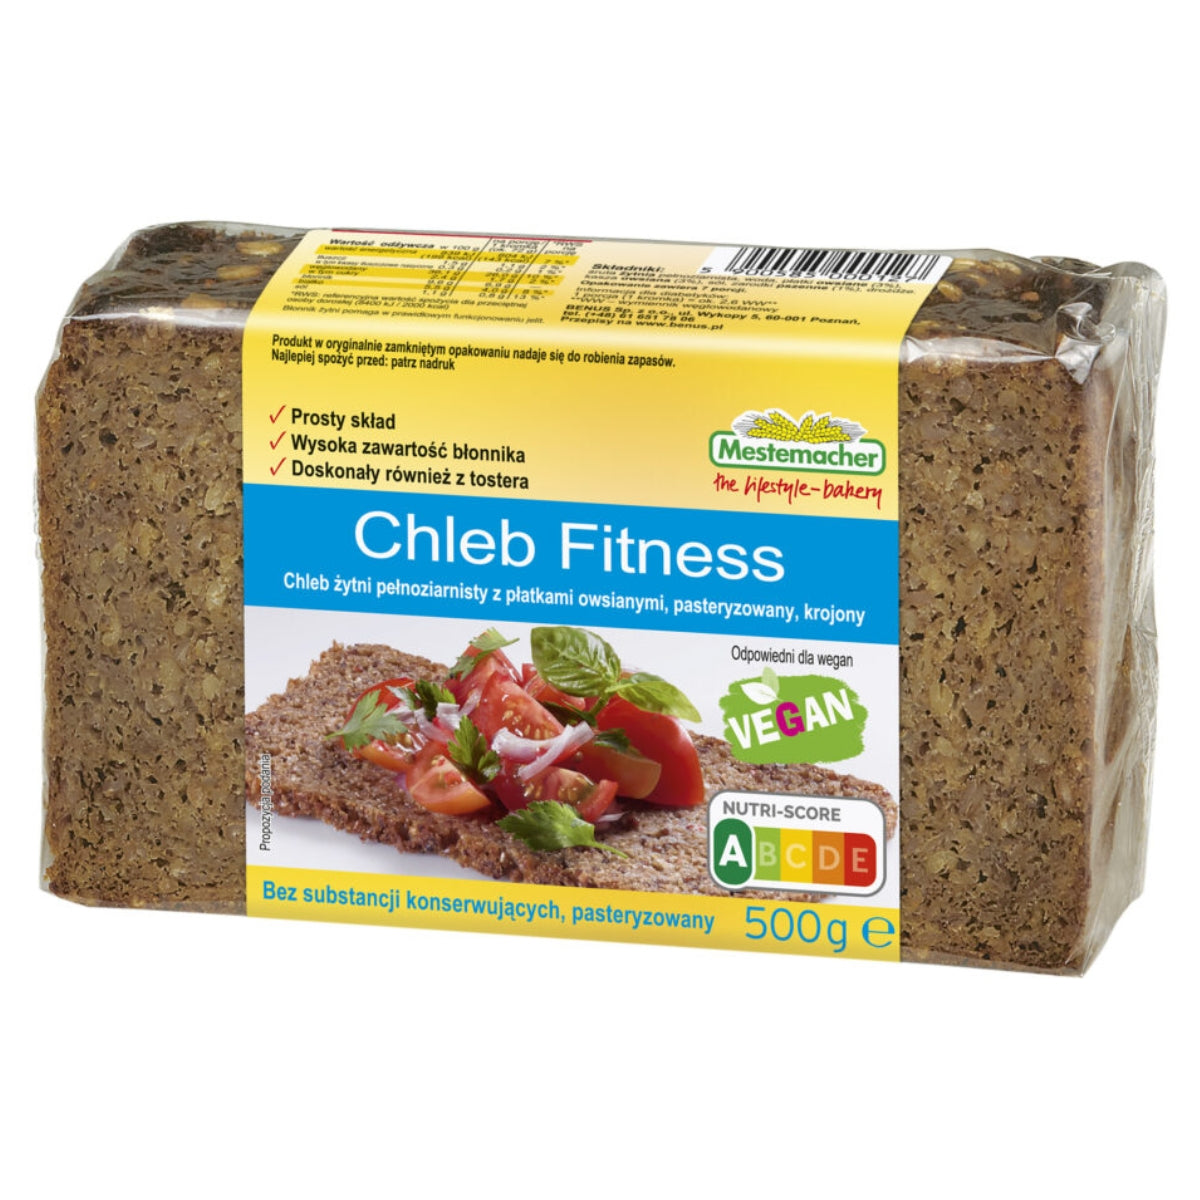 A loaf of Benus - Fitness Whole Grain Rye Bread (Chleb Fitness) - 500g with the words cheb fitness on it, made with high fiber content.